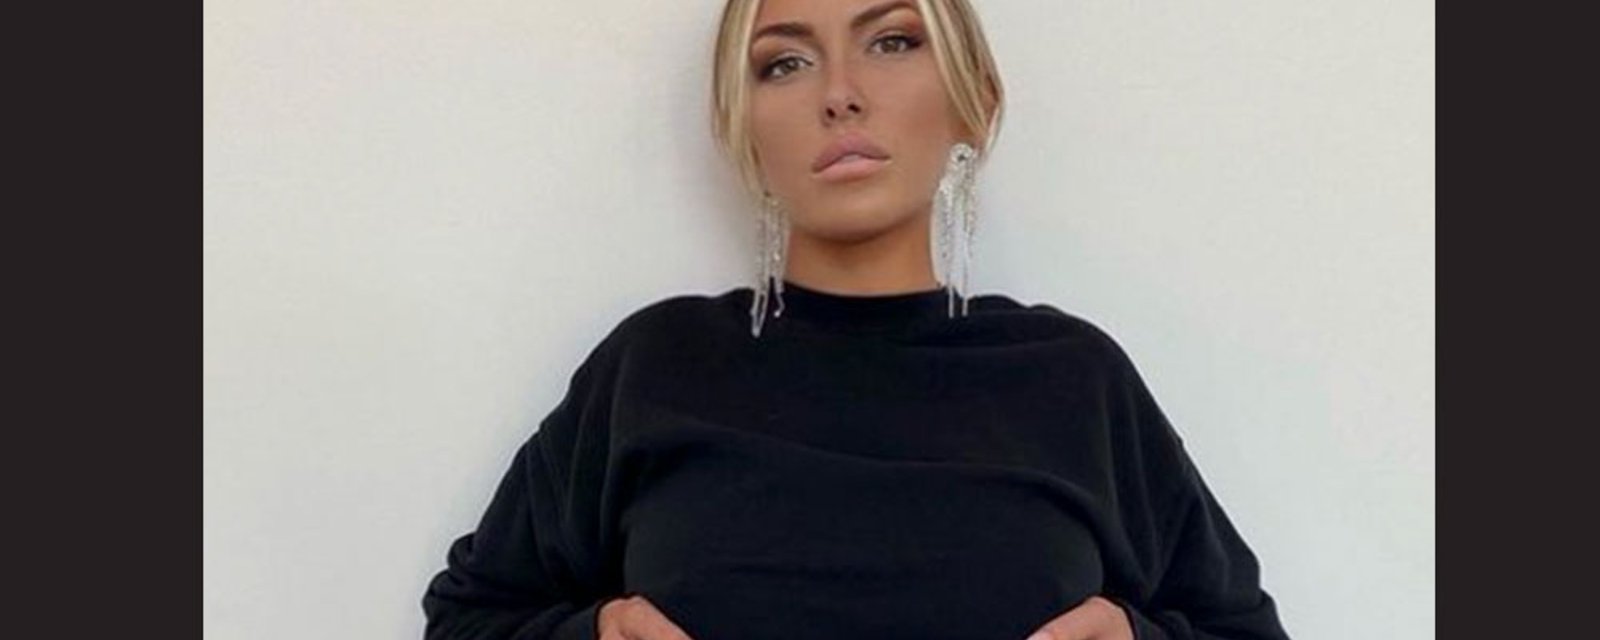 Paulina Gretzky pulls up her top in revealing new photos